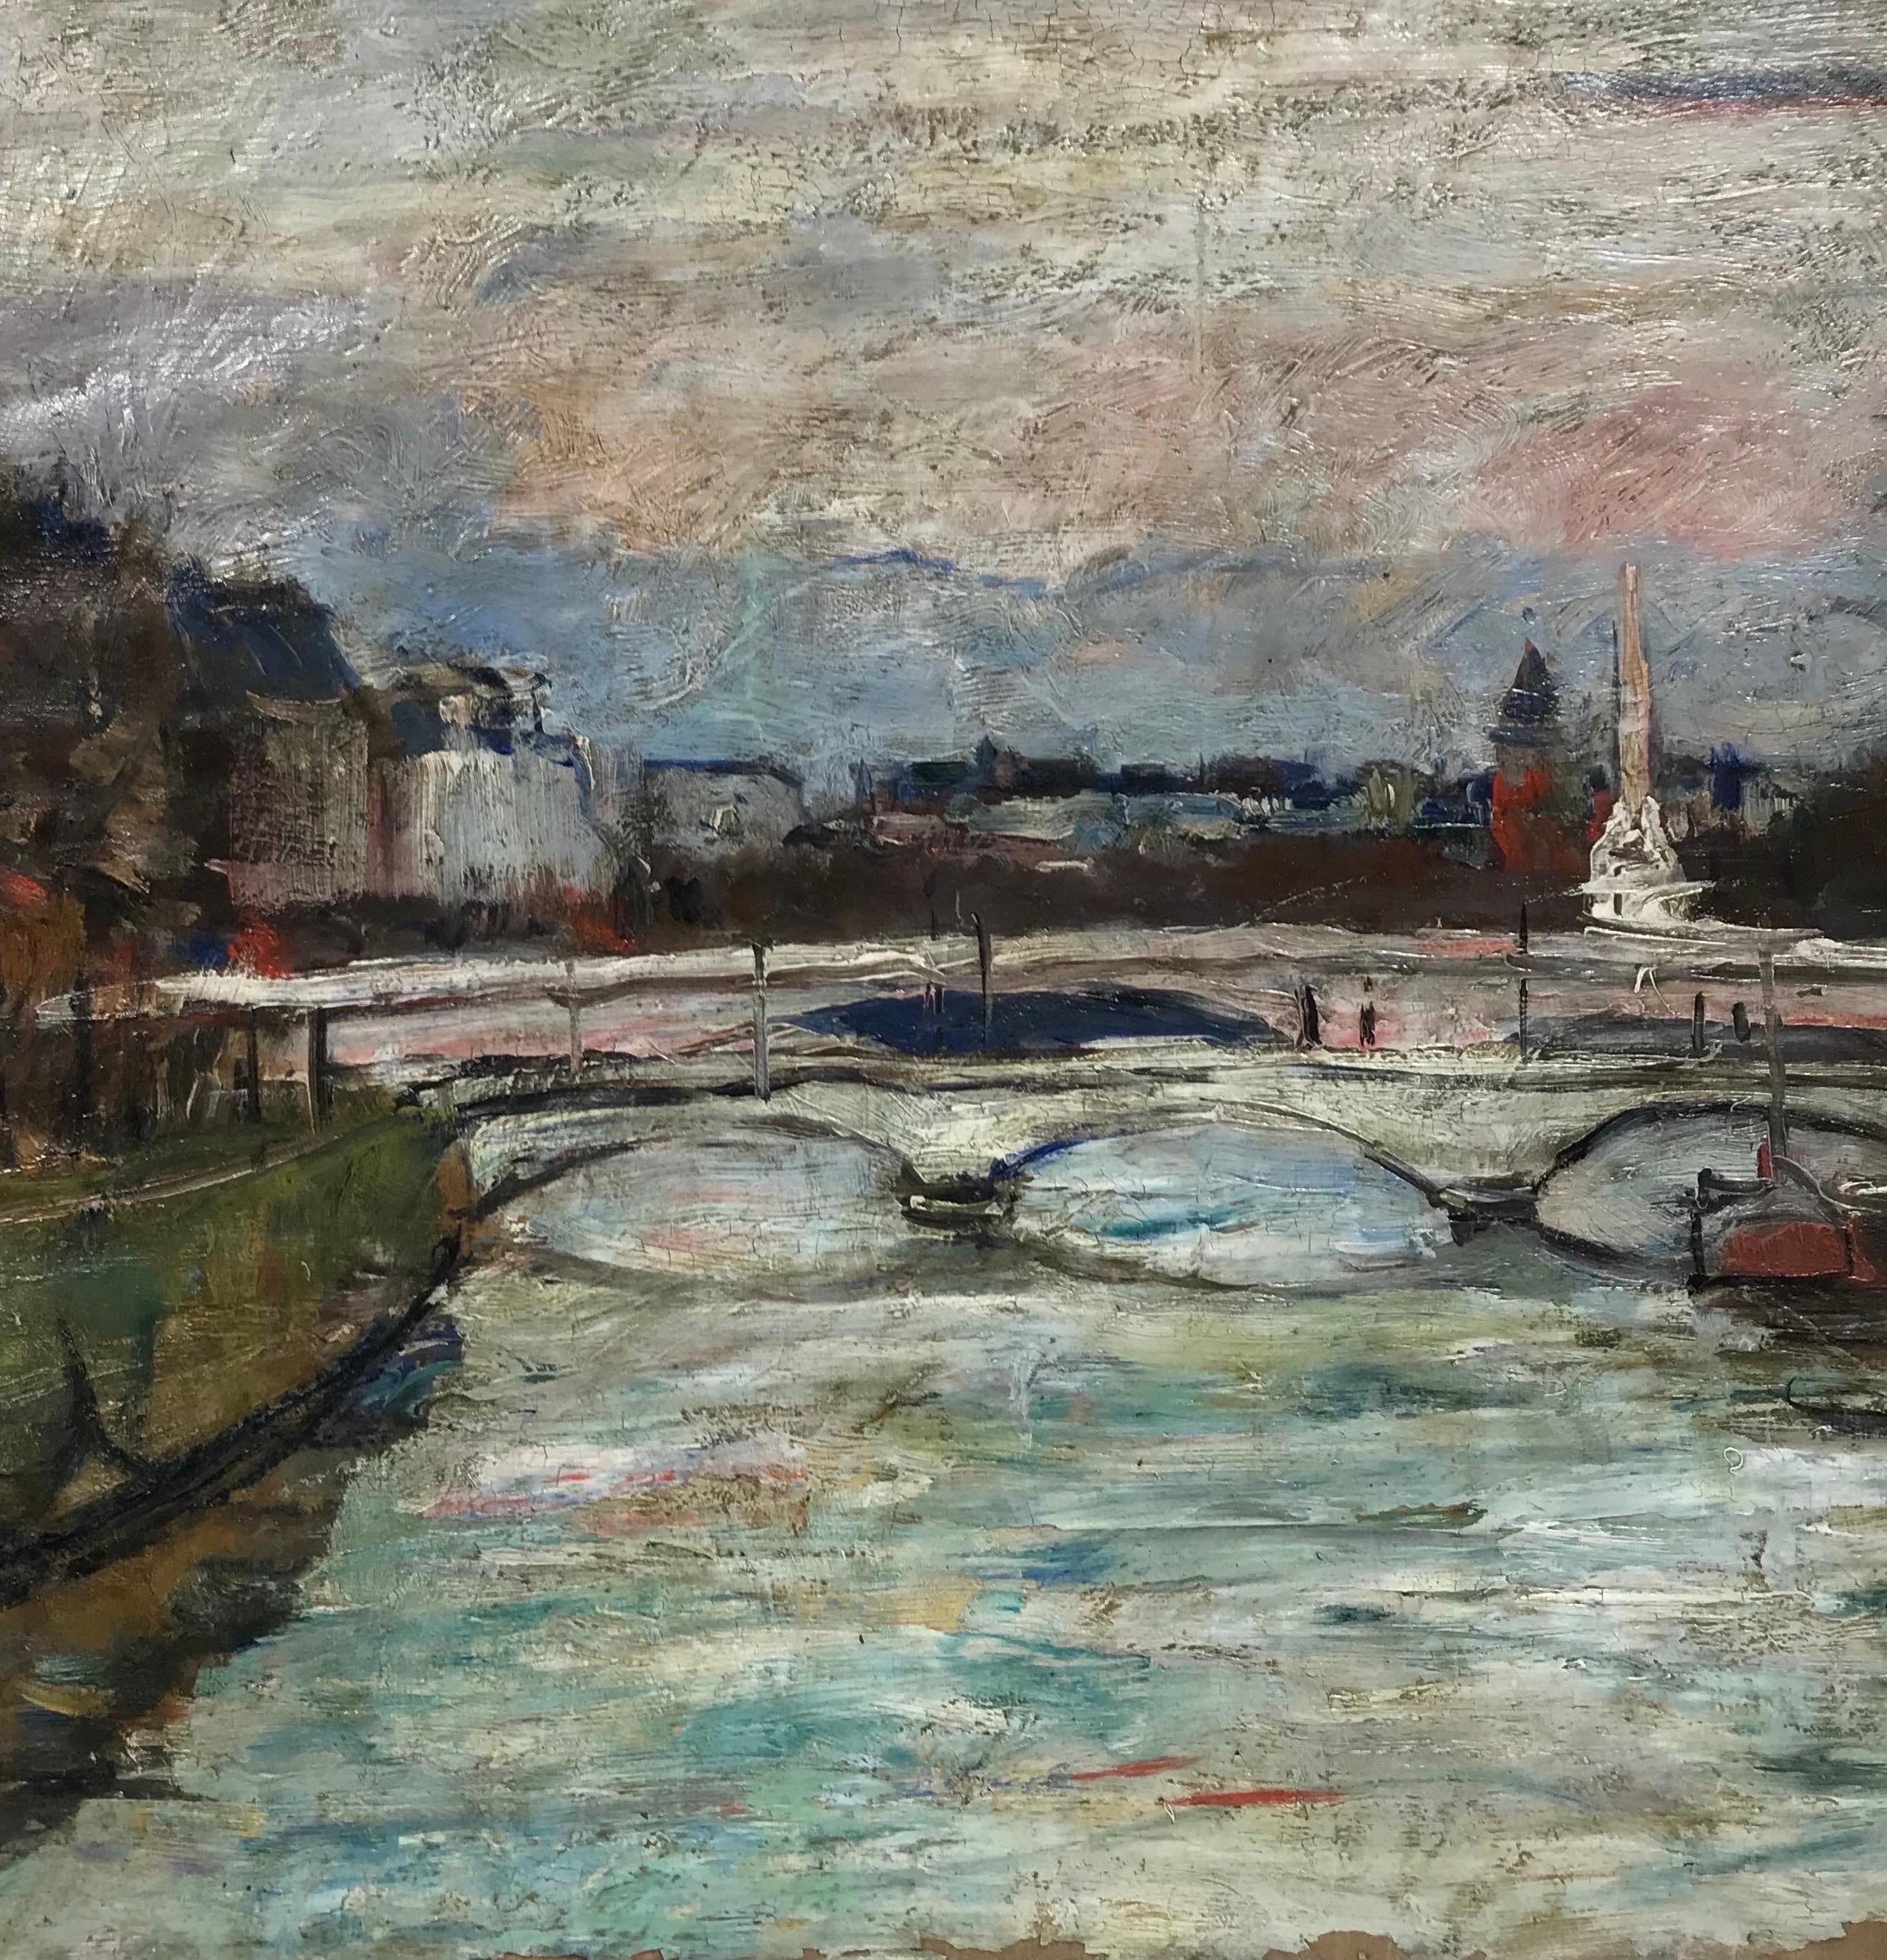 The River Seine Paris, signed French Post-Impressionist Oil Painting, c. 1930's - Gray Landscape Painting by Paul Petit